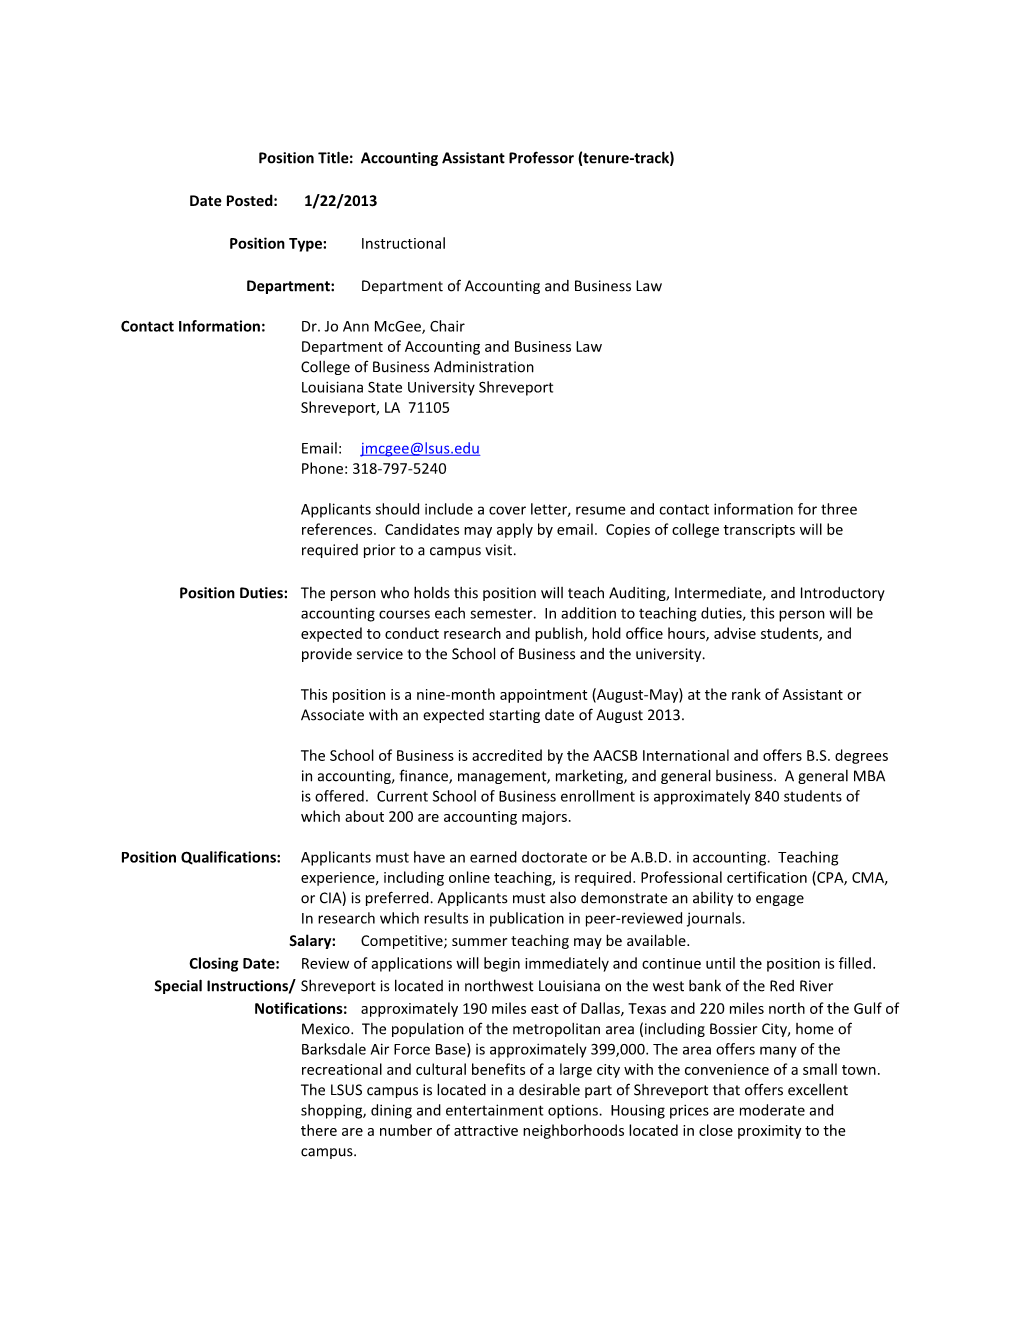 Position Title: Accounting Assistant Professor (Tenure-Track)